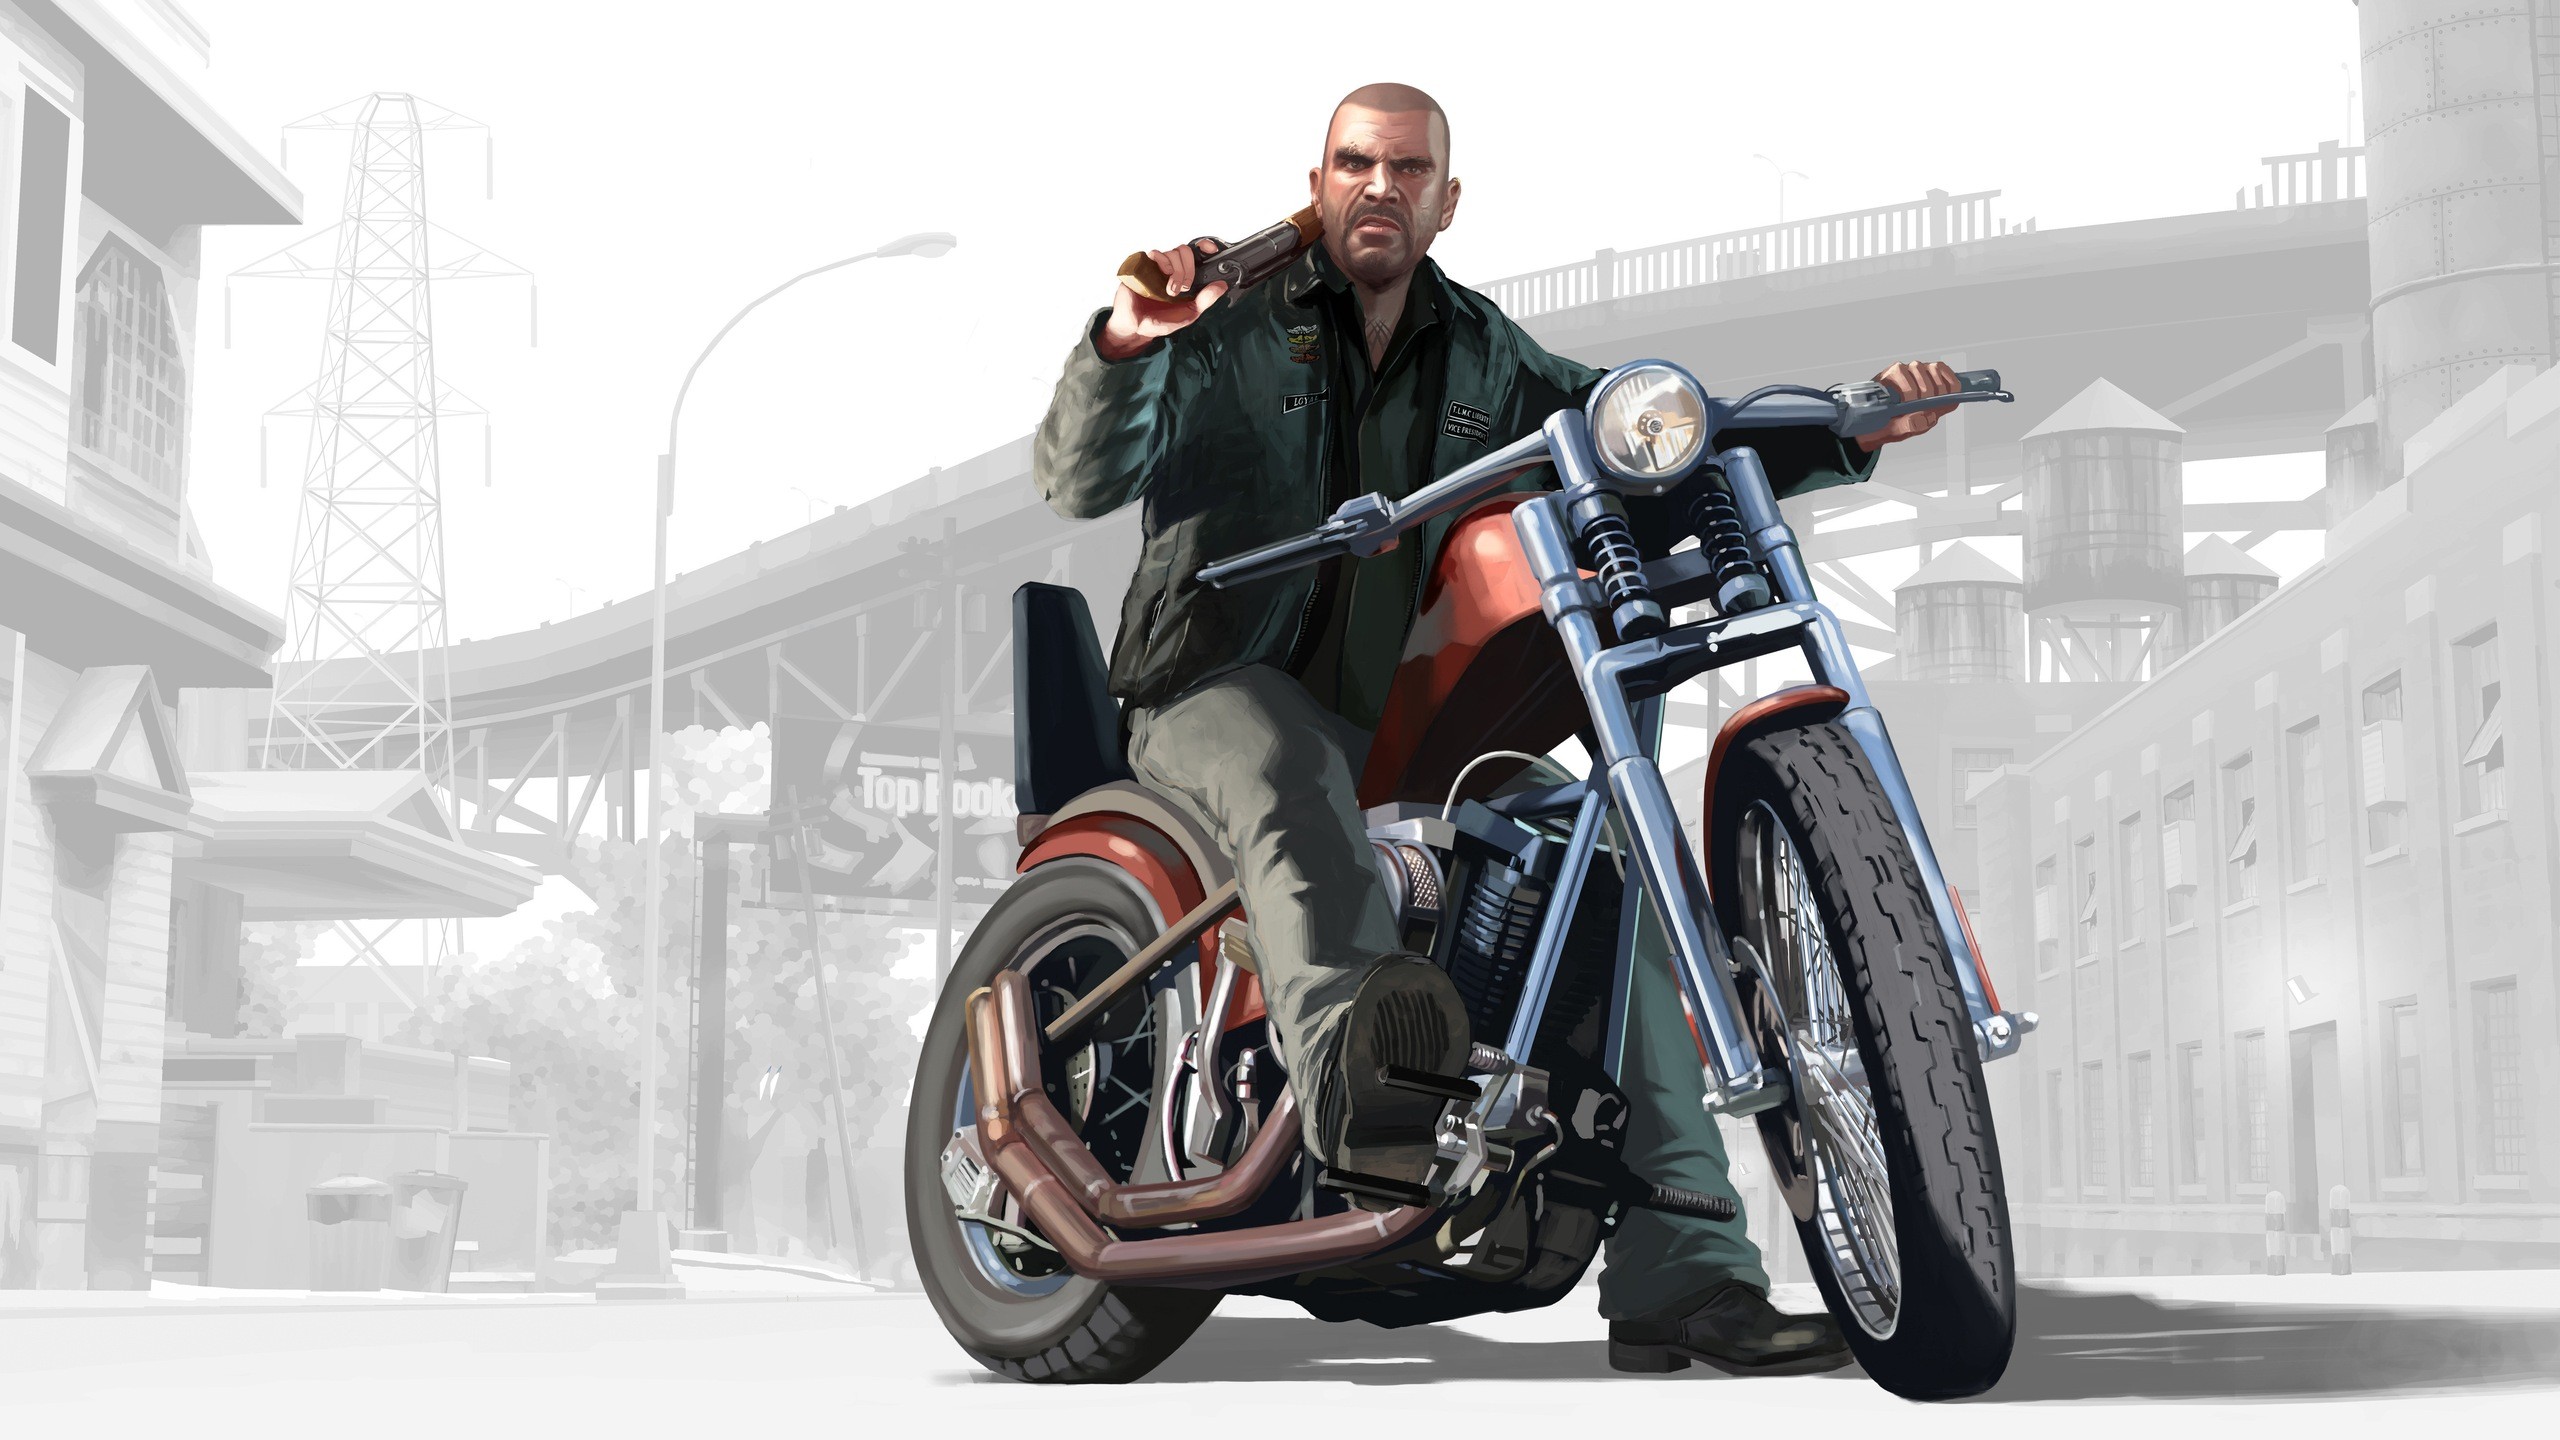 Video Game Grand Theft Auto IV HD Wallpaper | Background Image